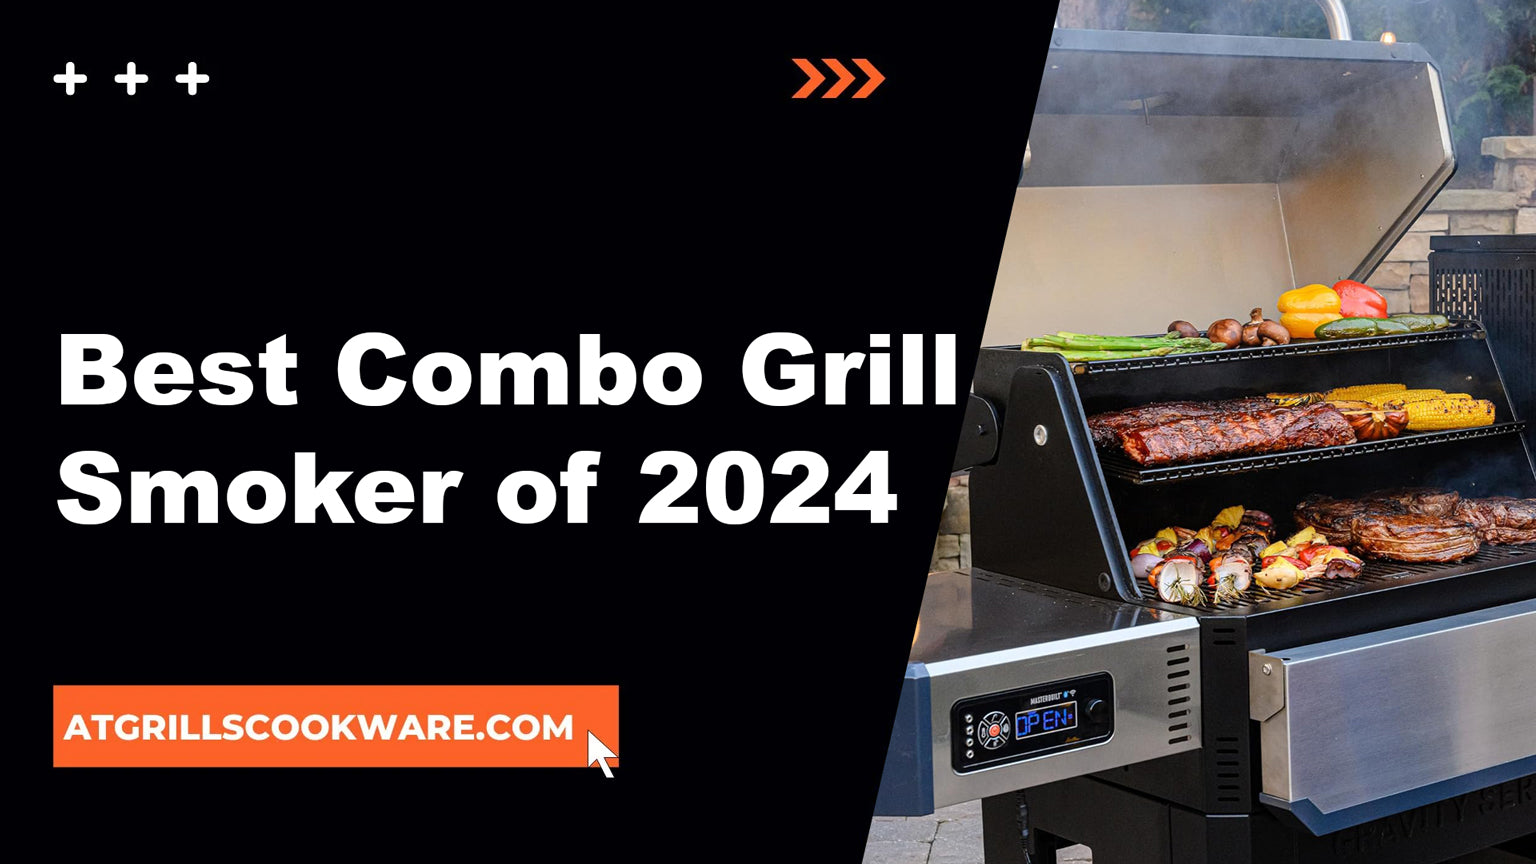 The Ultimate Guide to Choosing the Best Combo Grill Smoker of 2024